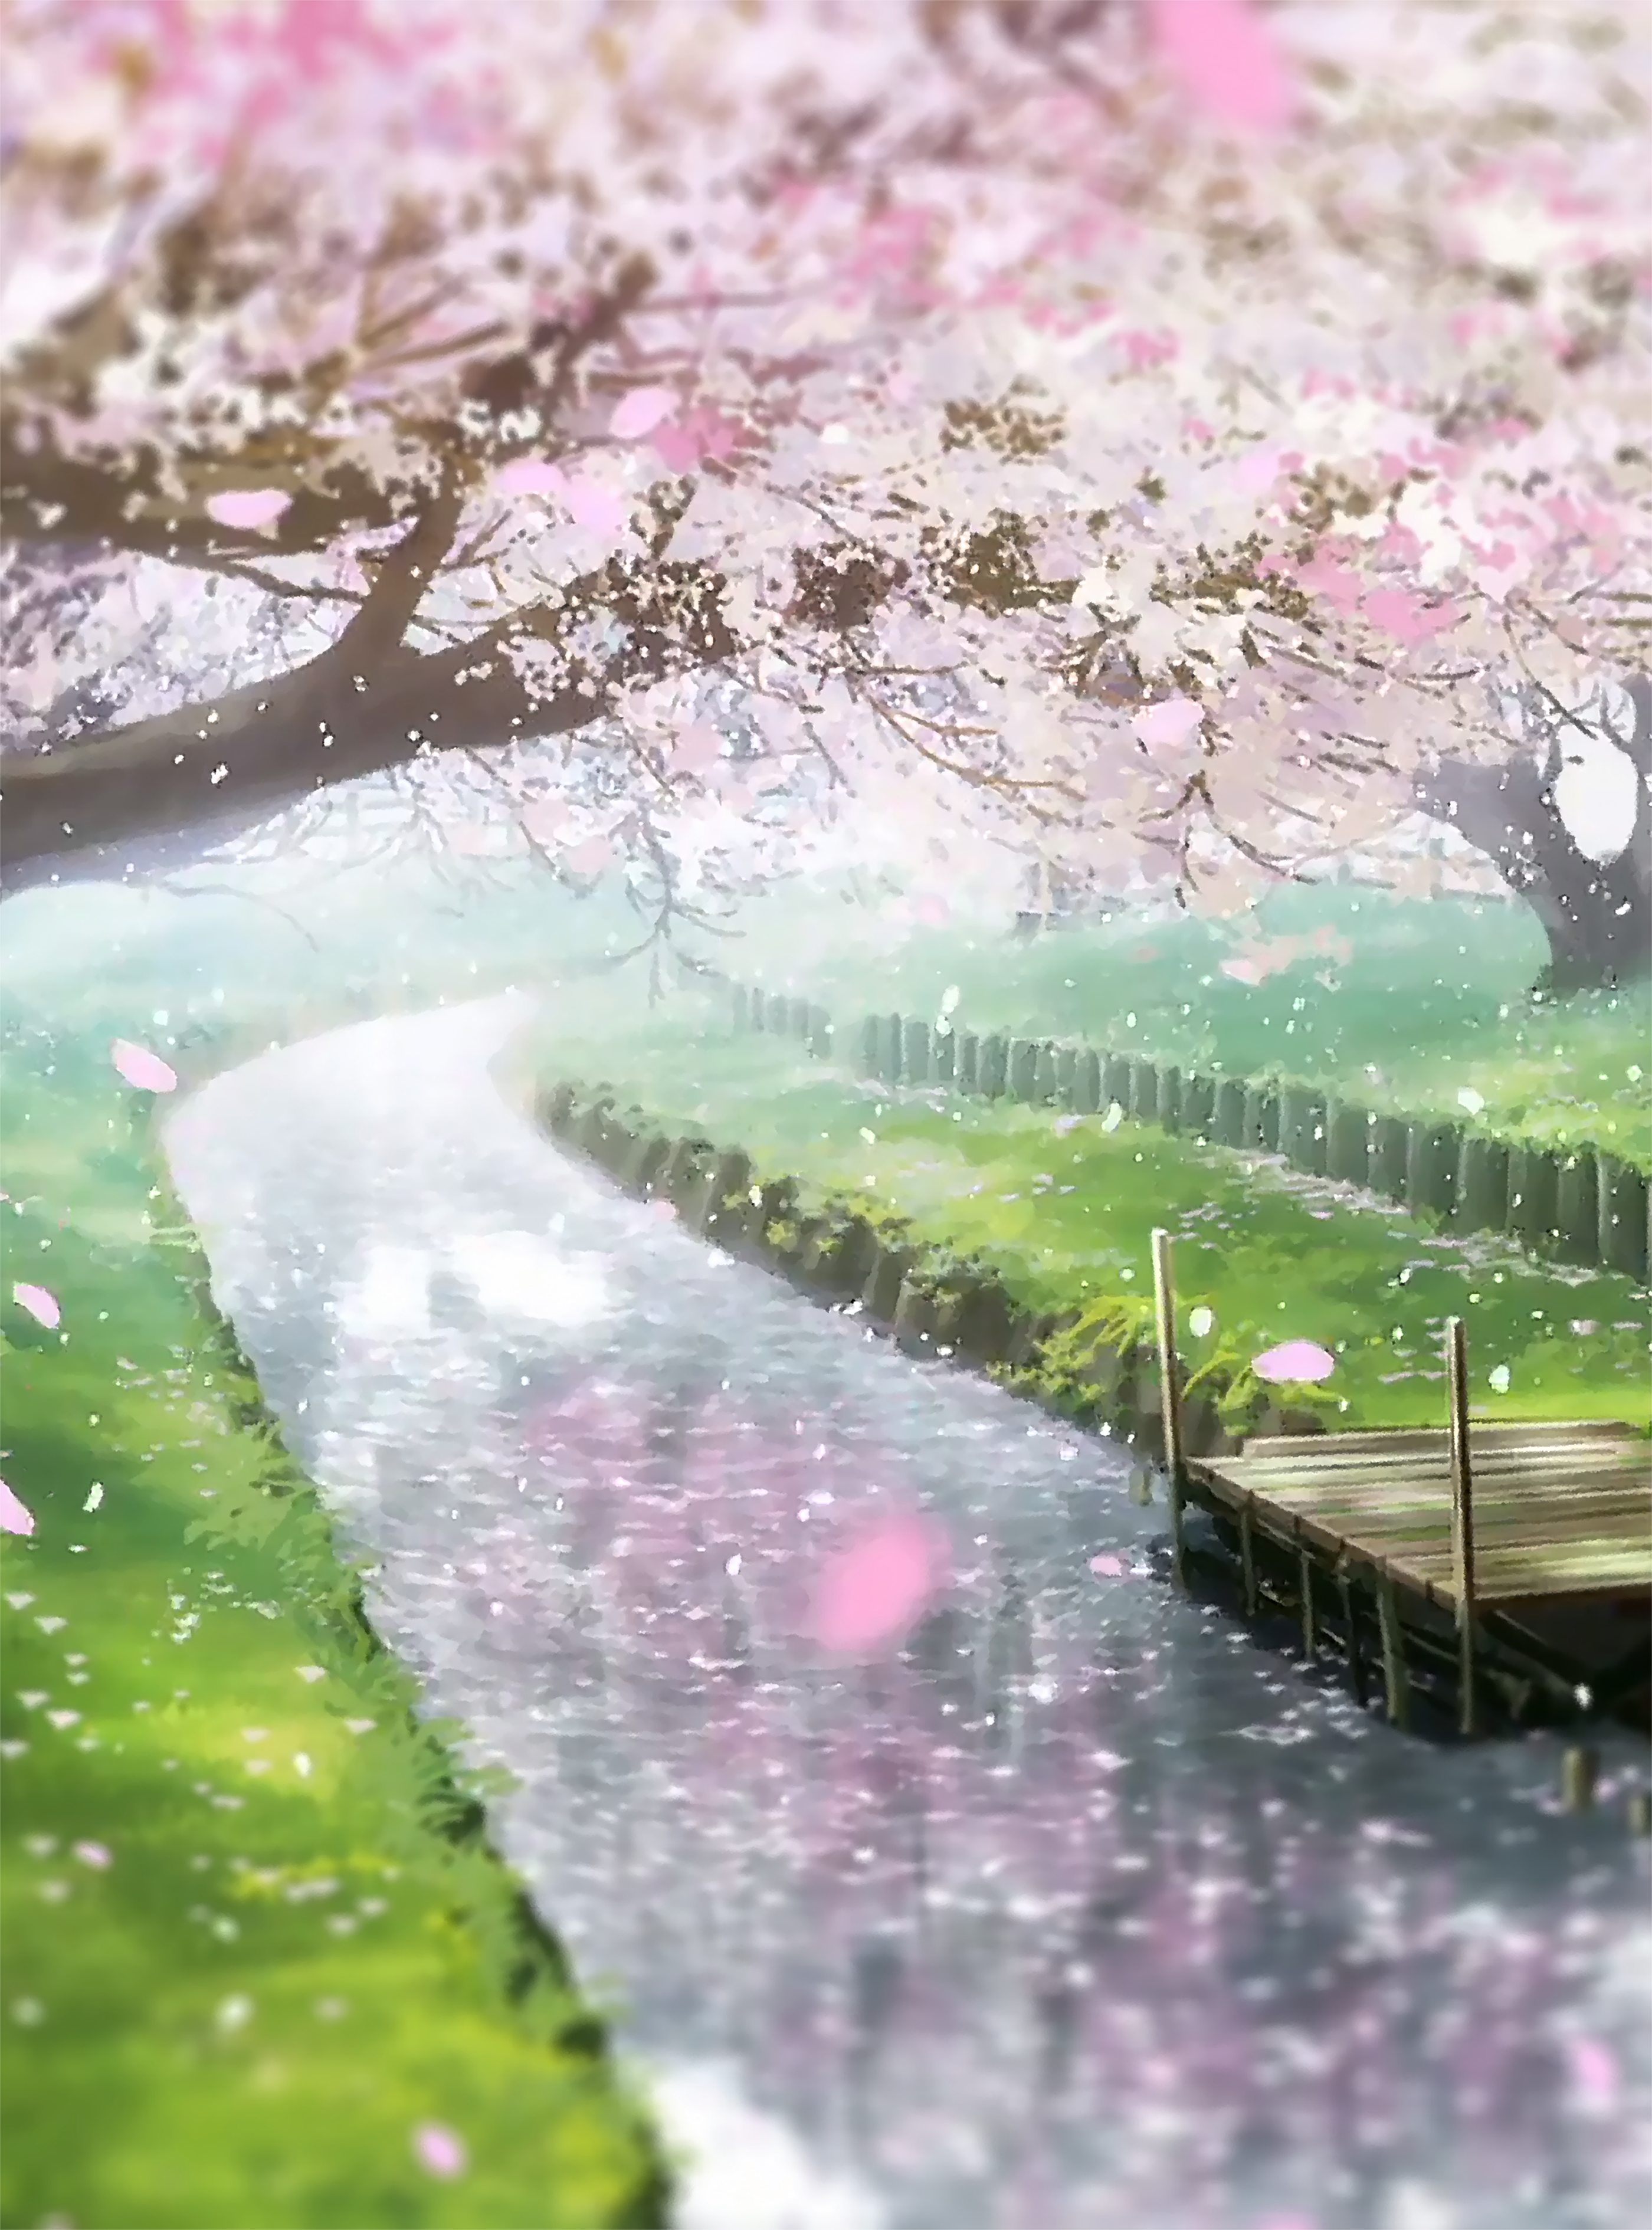 Anime Spring Scenery Wallpapers